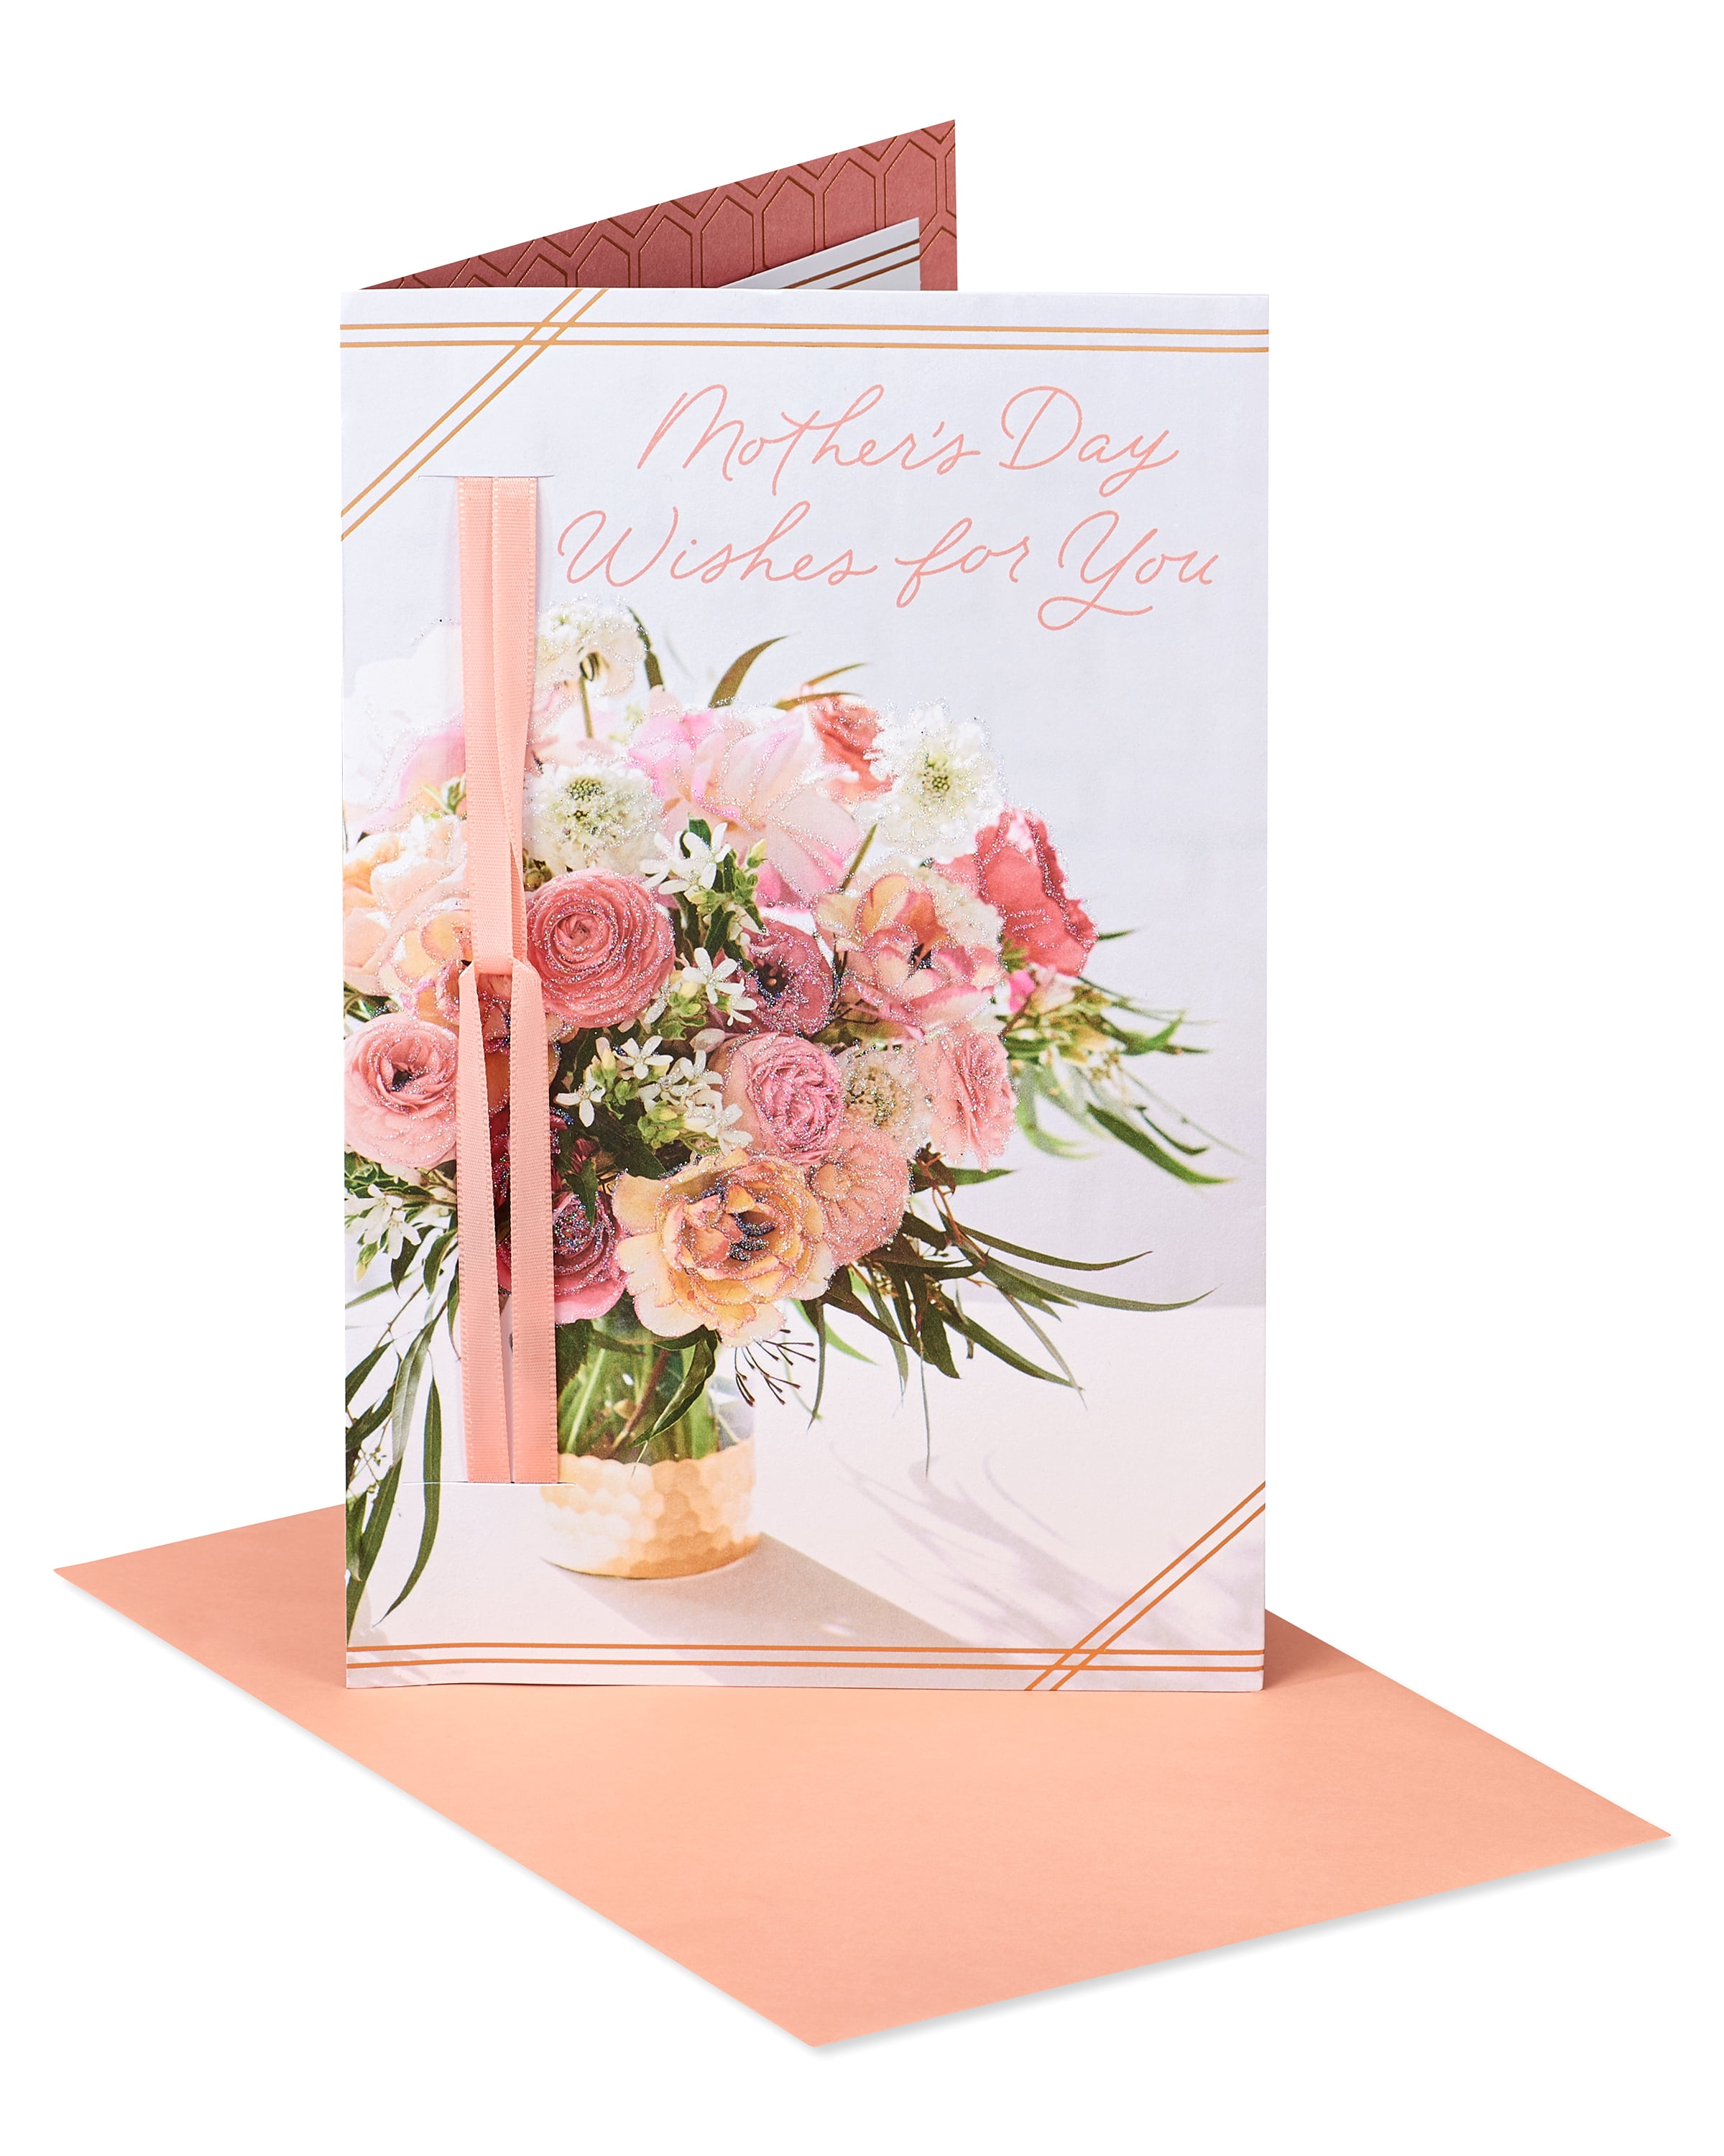 American Greetings Mothers Day Grandmother Floral Greeting Card $6.99 